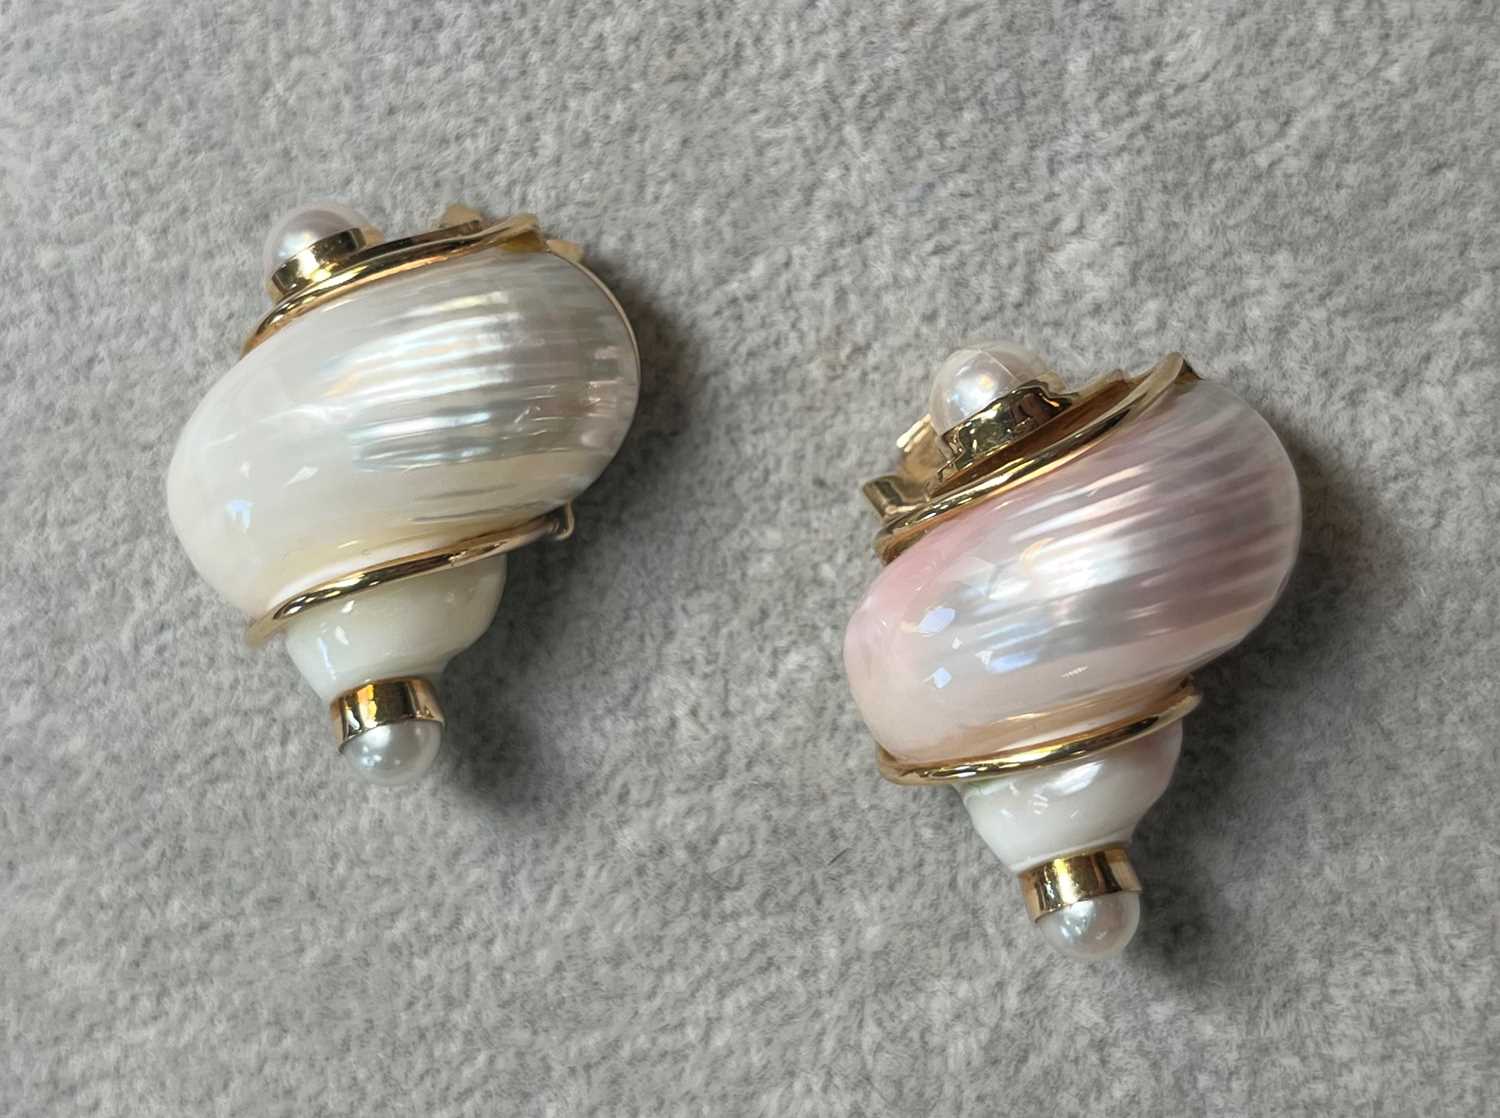 A pair of Turbo Shell clip earrings, by Seaman Schepps, - Image 3 of 5